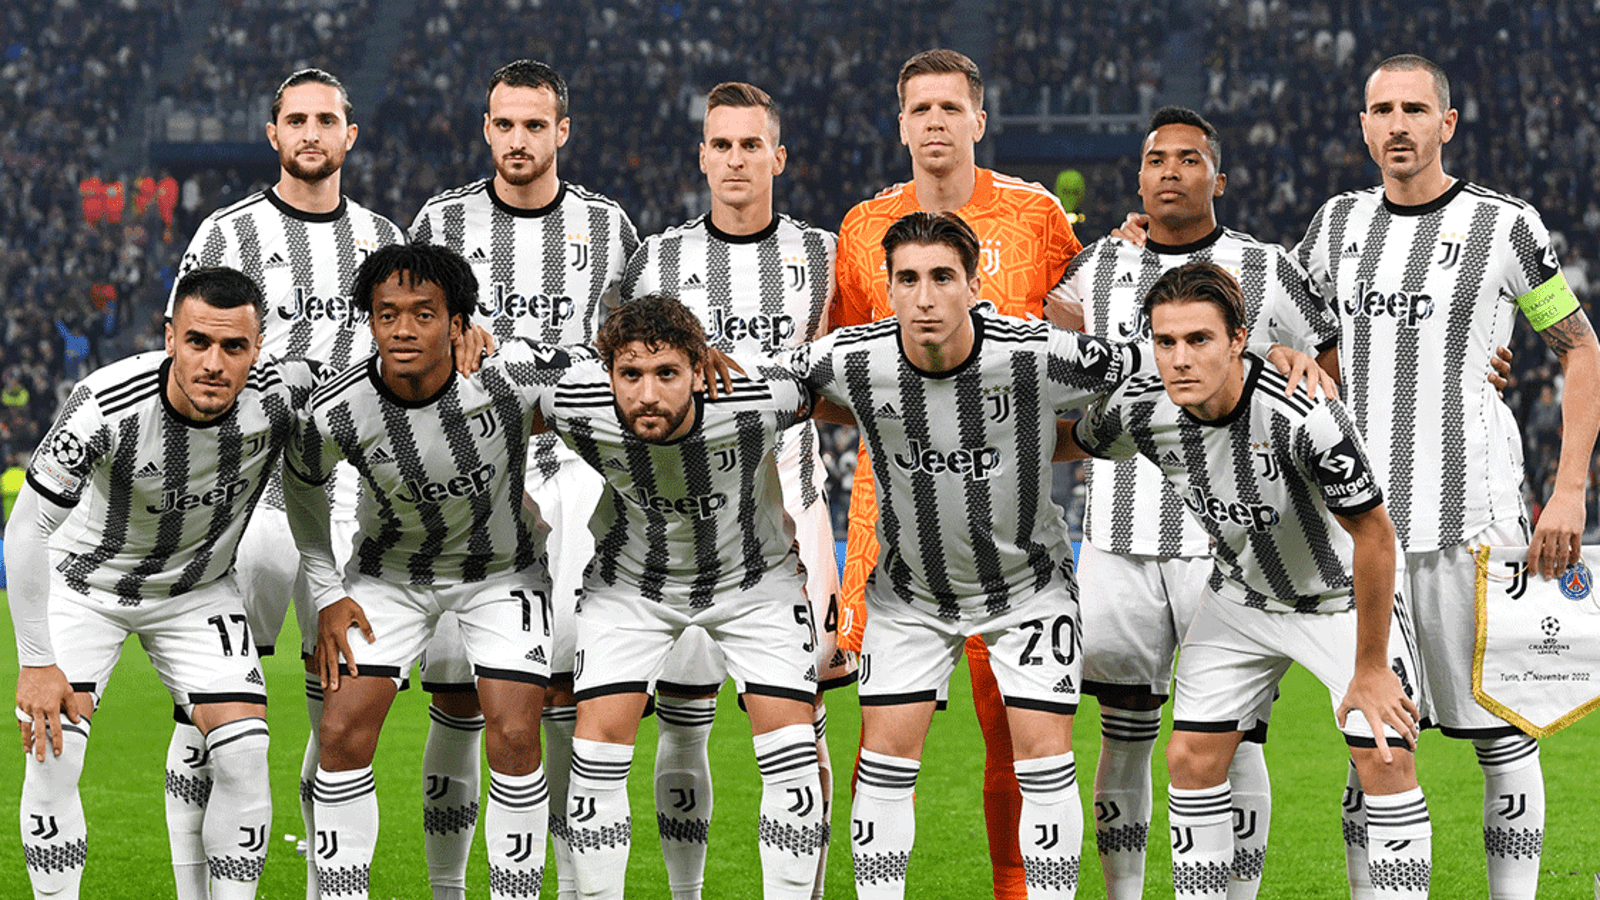 Juventus Notifies Real Madrid and Barcelona of Its Desire to Quit Super League Project